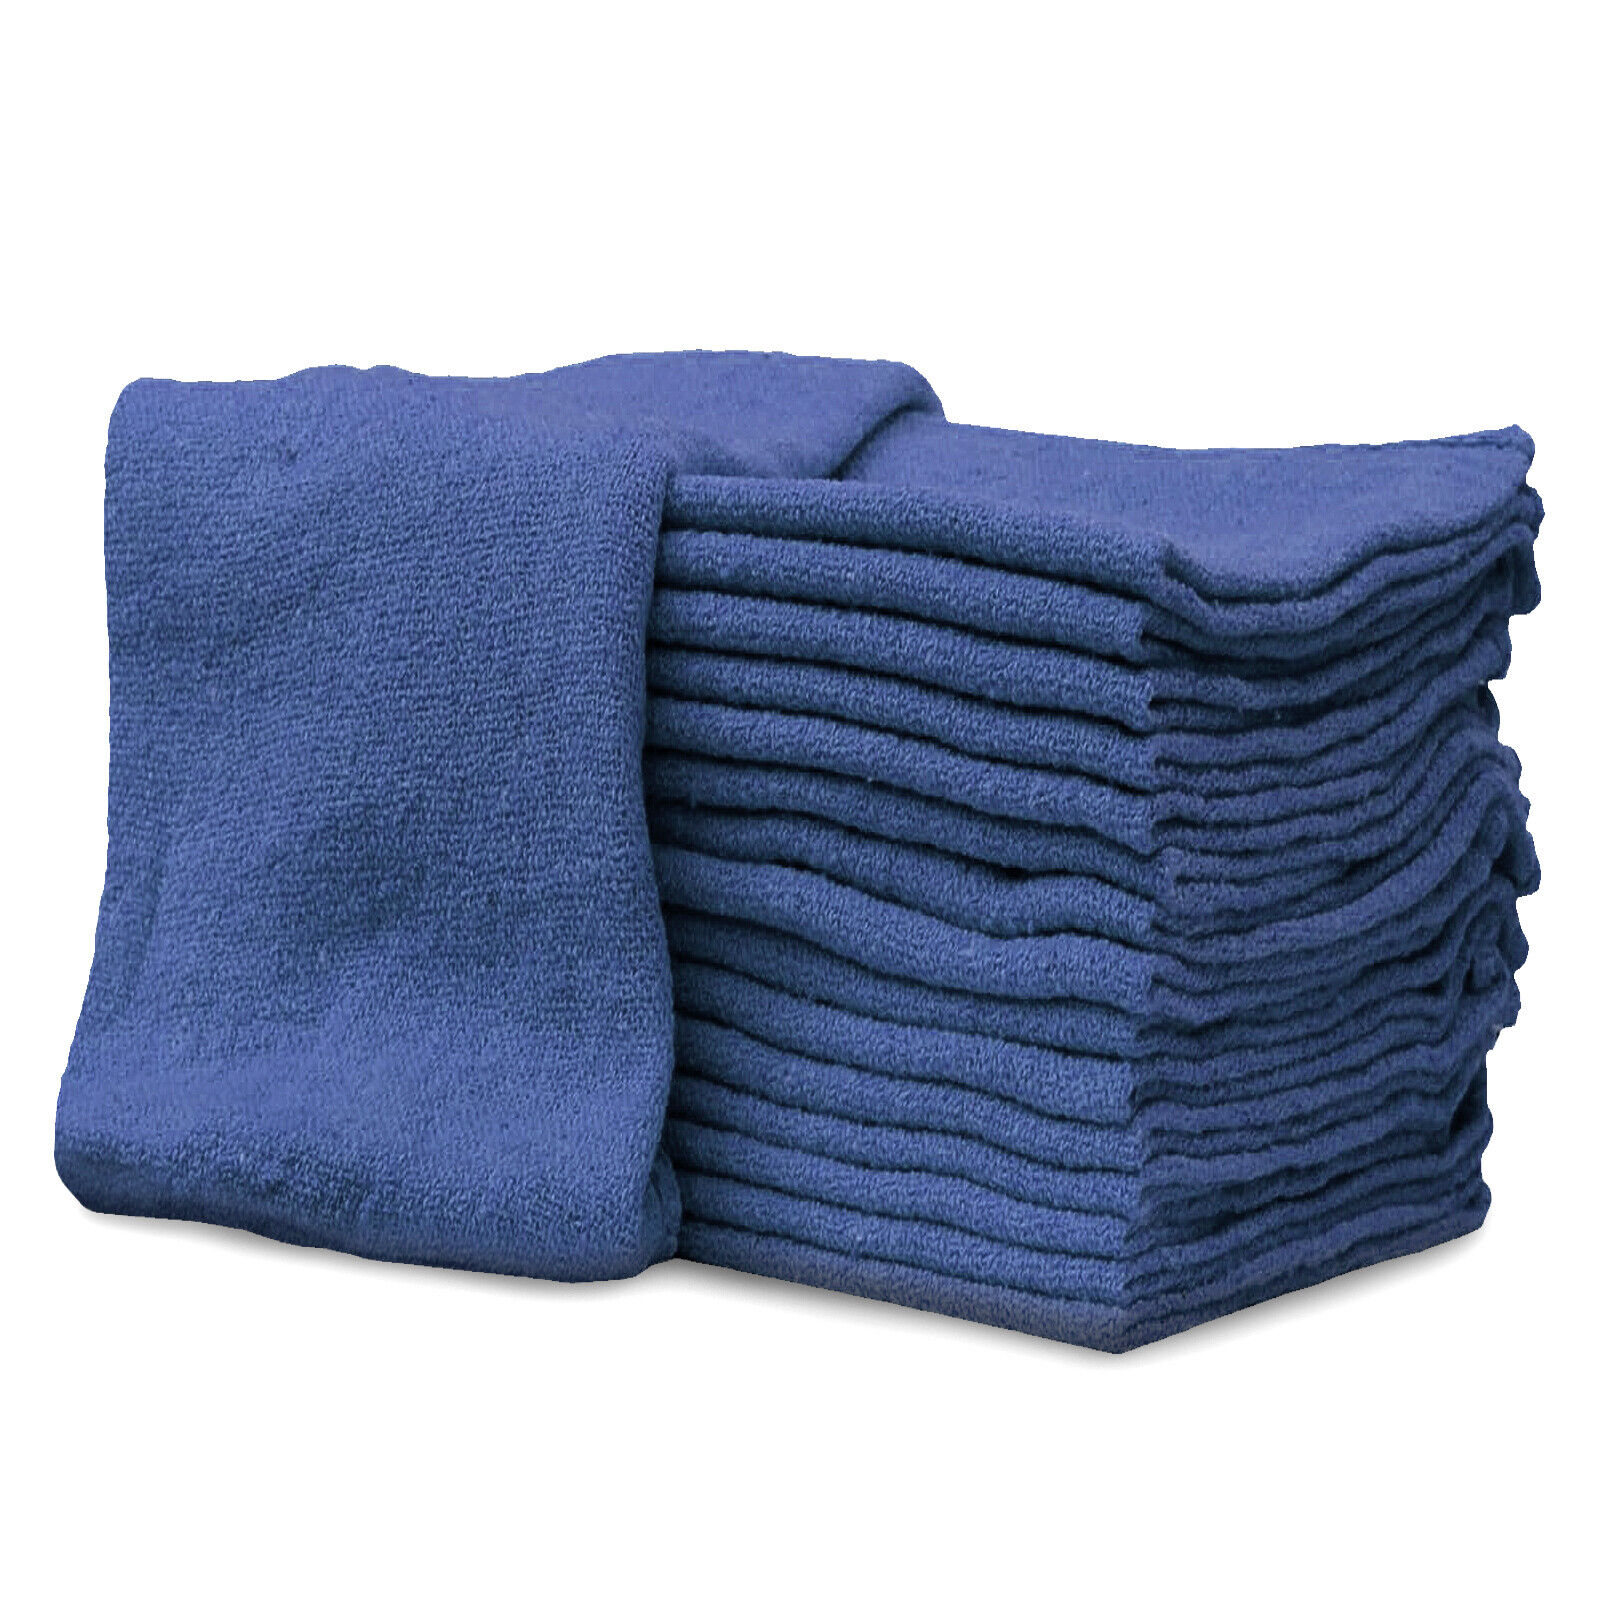 New Industrial A-Grade Shop Towels-Cleaning Towels Blue - Multipurpose Cleaning